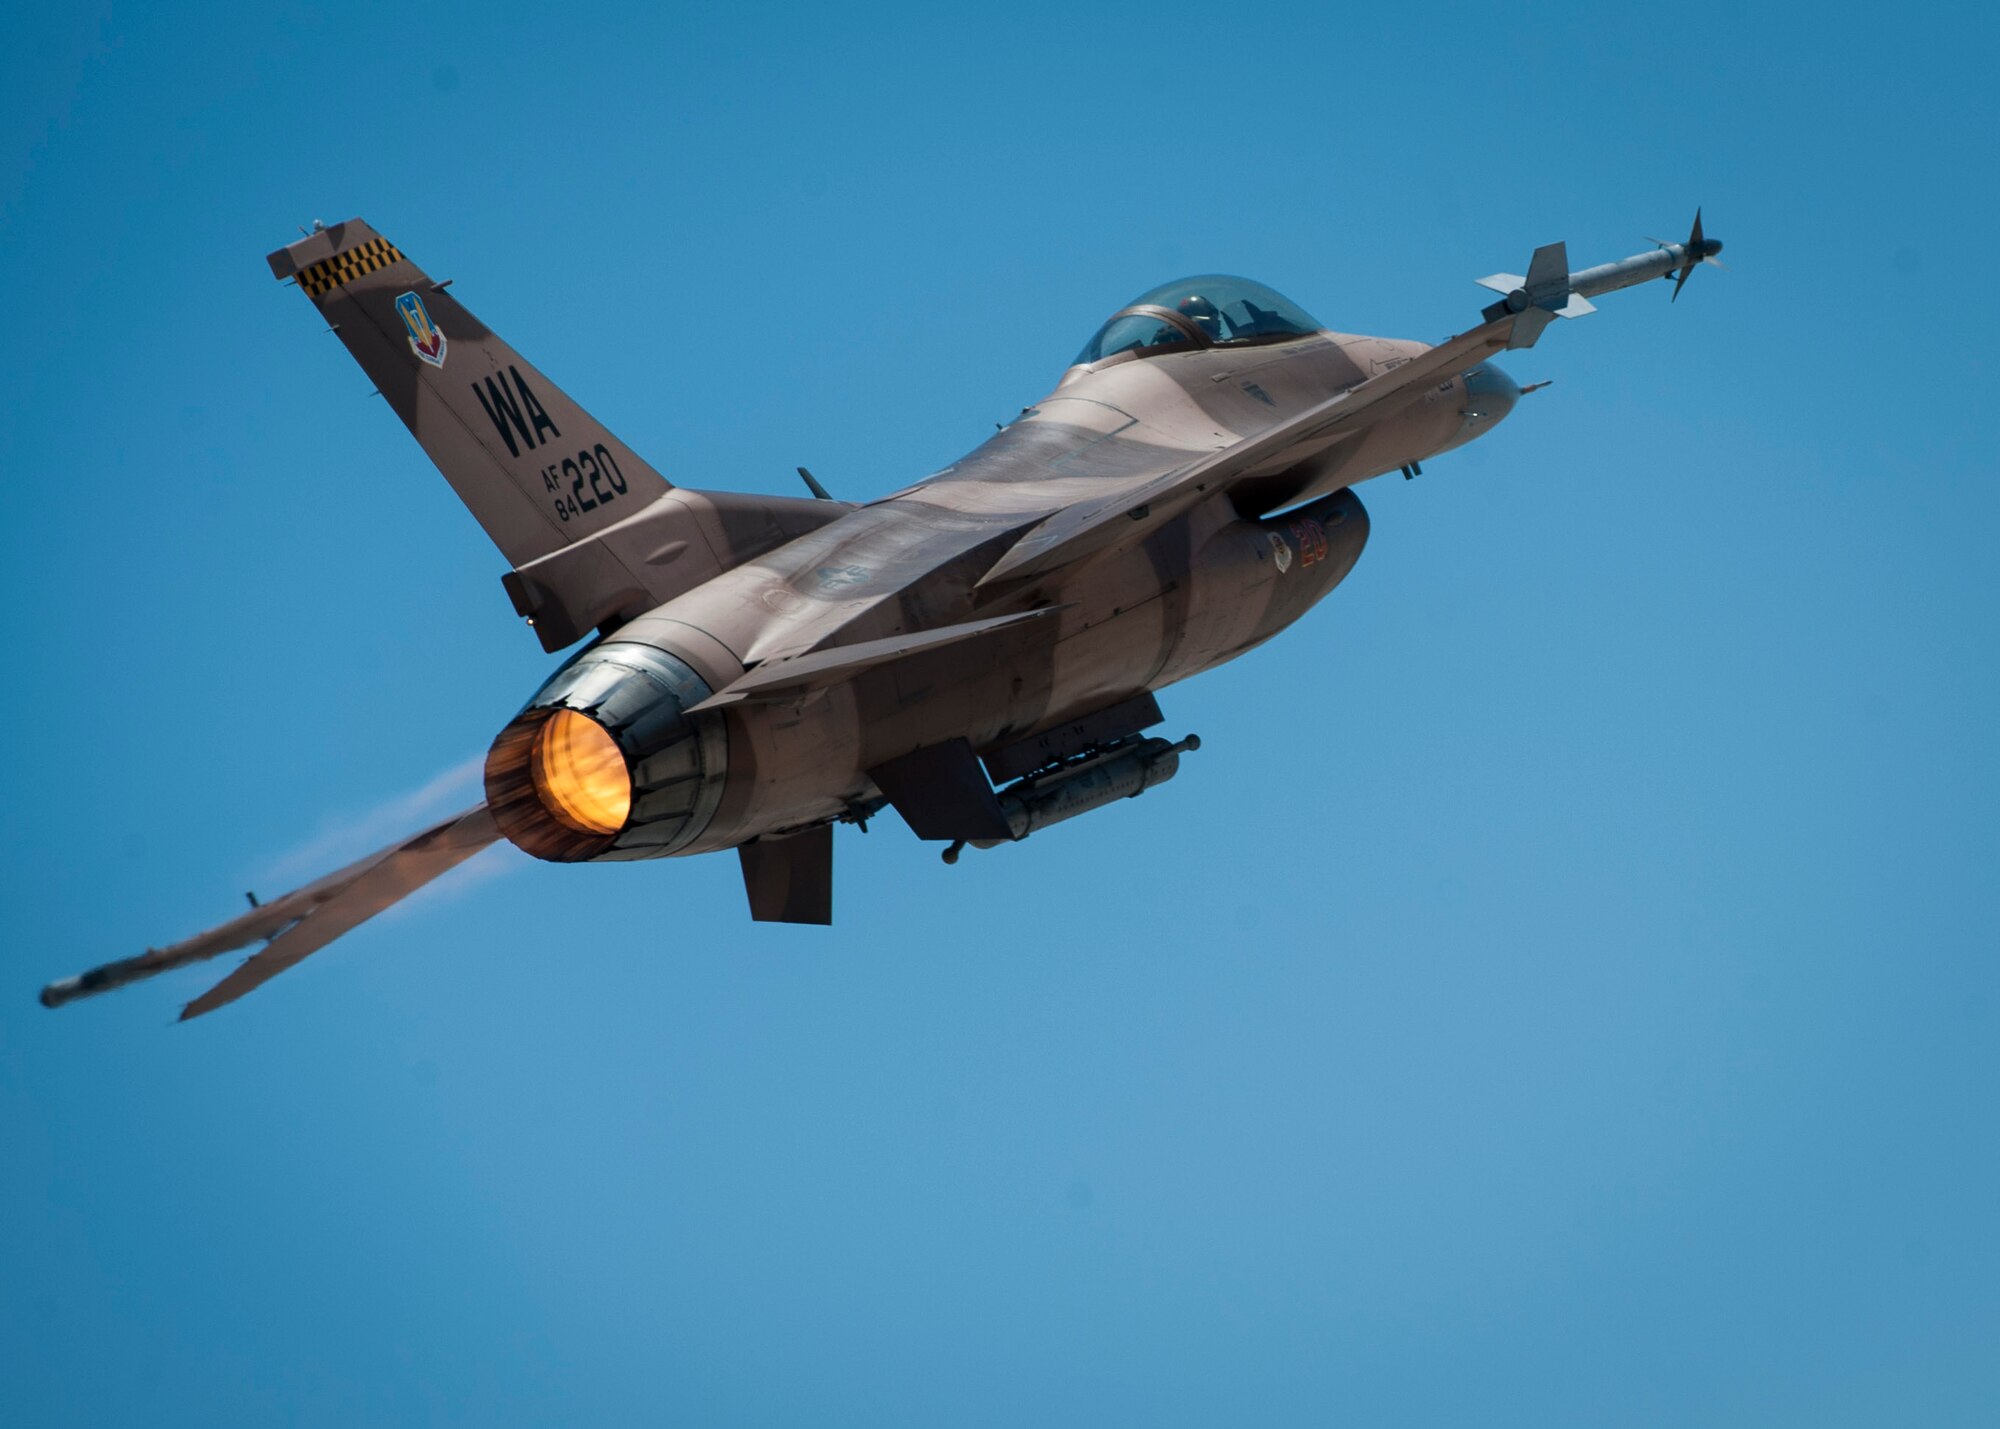 An F-16C from the 64th Aggressors Squadron, Nellis Air Force Base, Nev., banks off towards the Nevada Test and Training Range to participate in a training sortie during Red Flag 16-3, July 19, 2016. During Red Flag, the 64th AGRS will test other unit’s capabilities in air-to-air combat while acting as the “enemy” in the exercise. (U.S. Air Force photo by Senior Airman Jake Carter/Released)